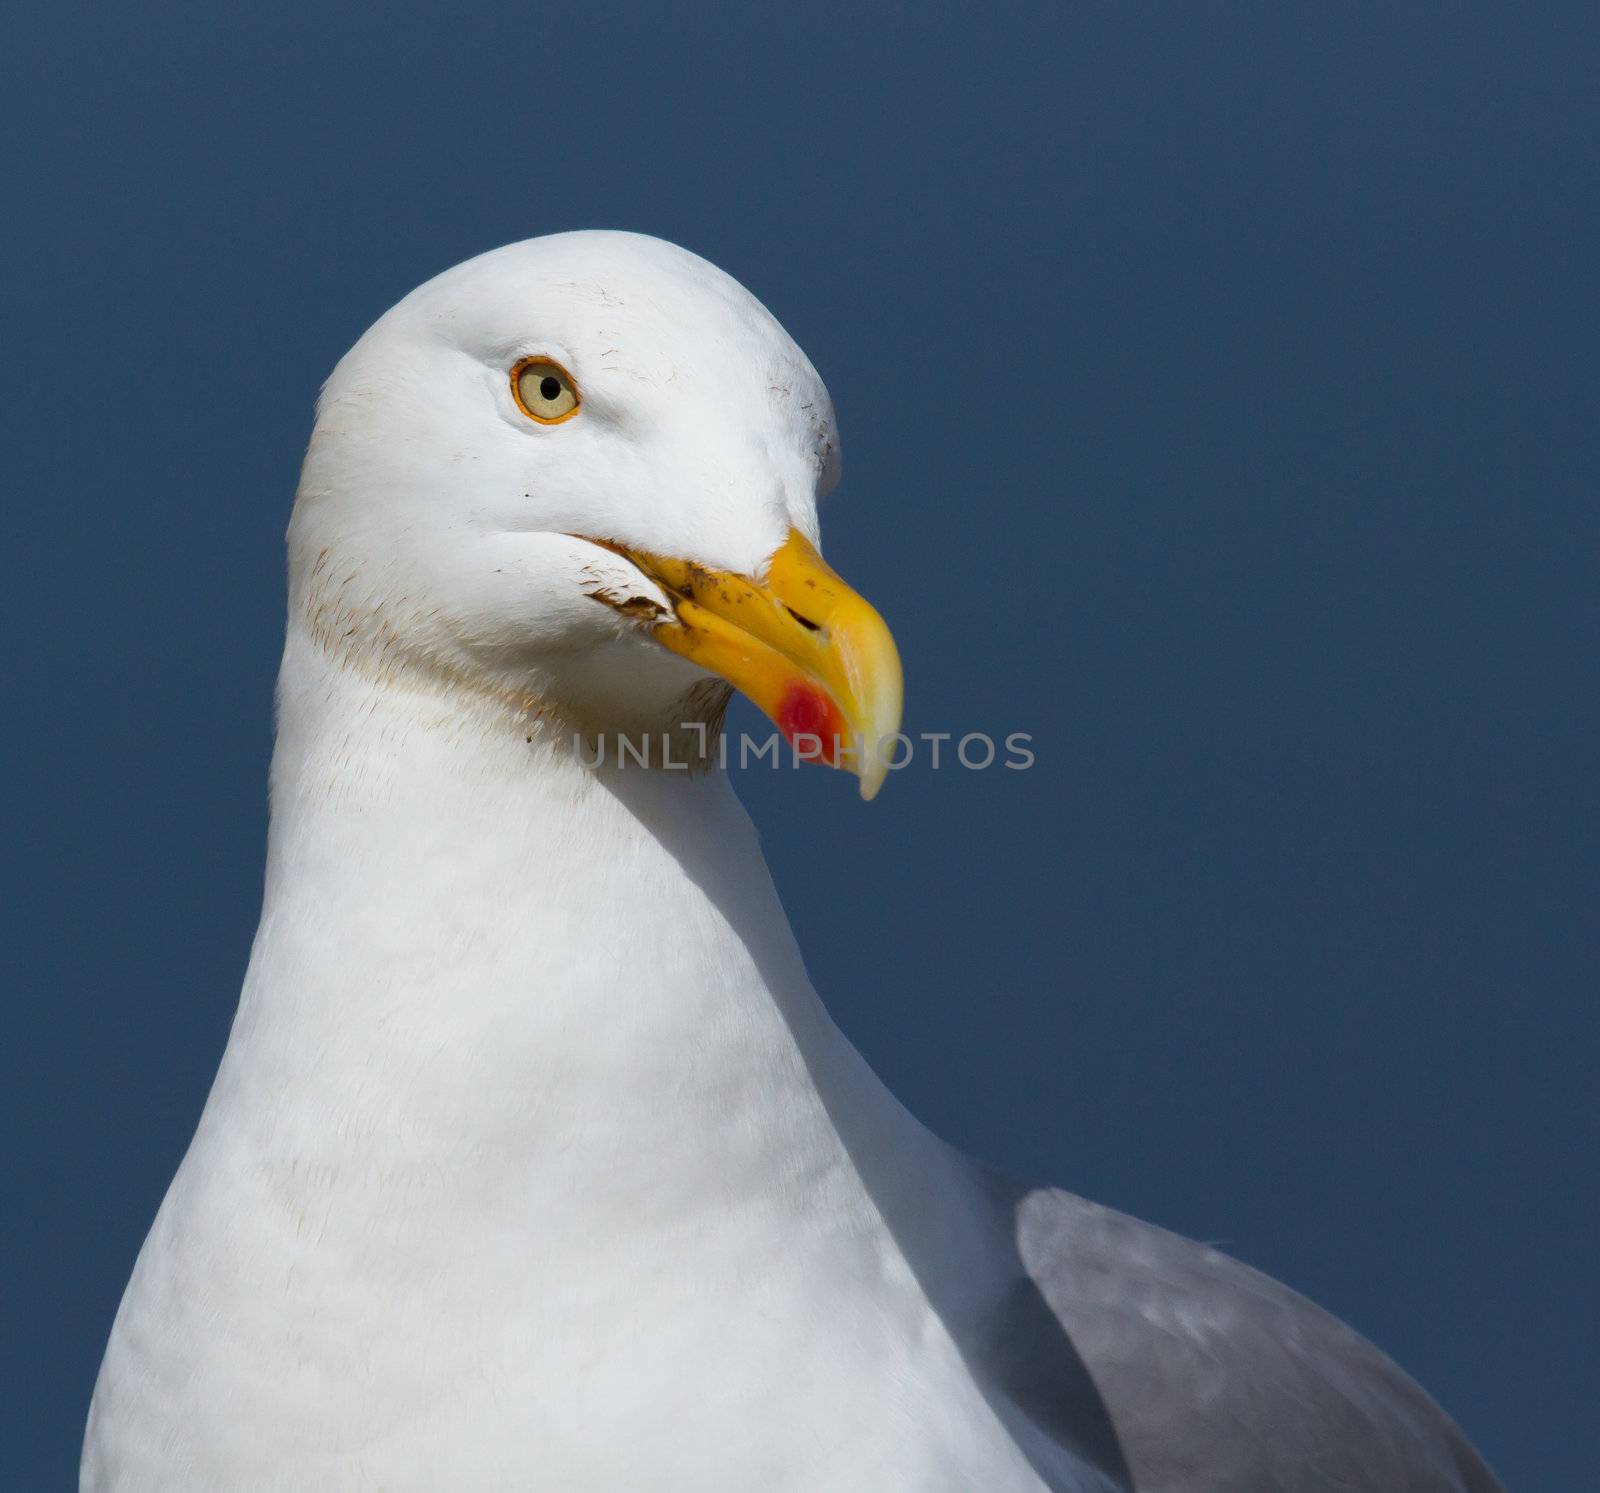 A close-up of a seagull by michaklootwijk